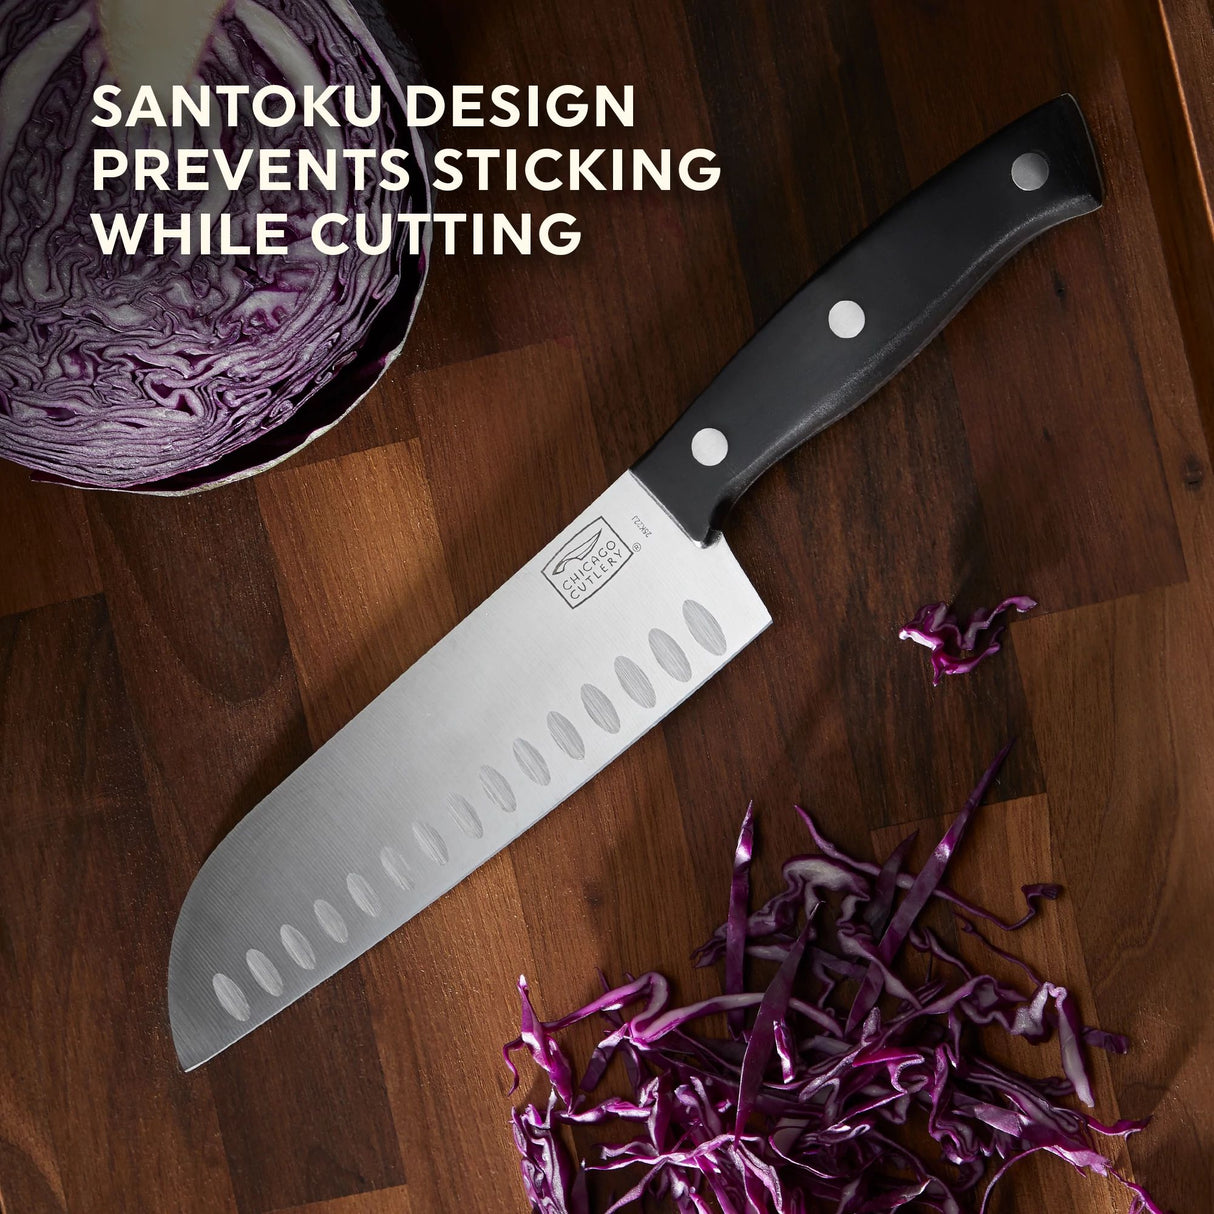  Ellsworth Santoku Knife with text Santoku design prevents sticking while cutting